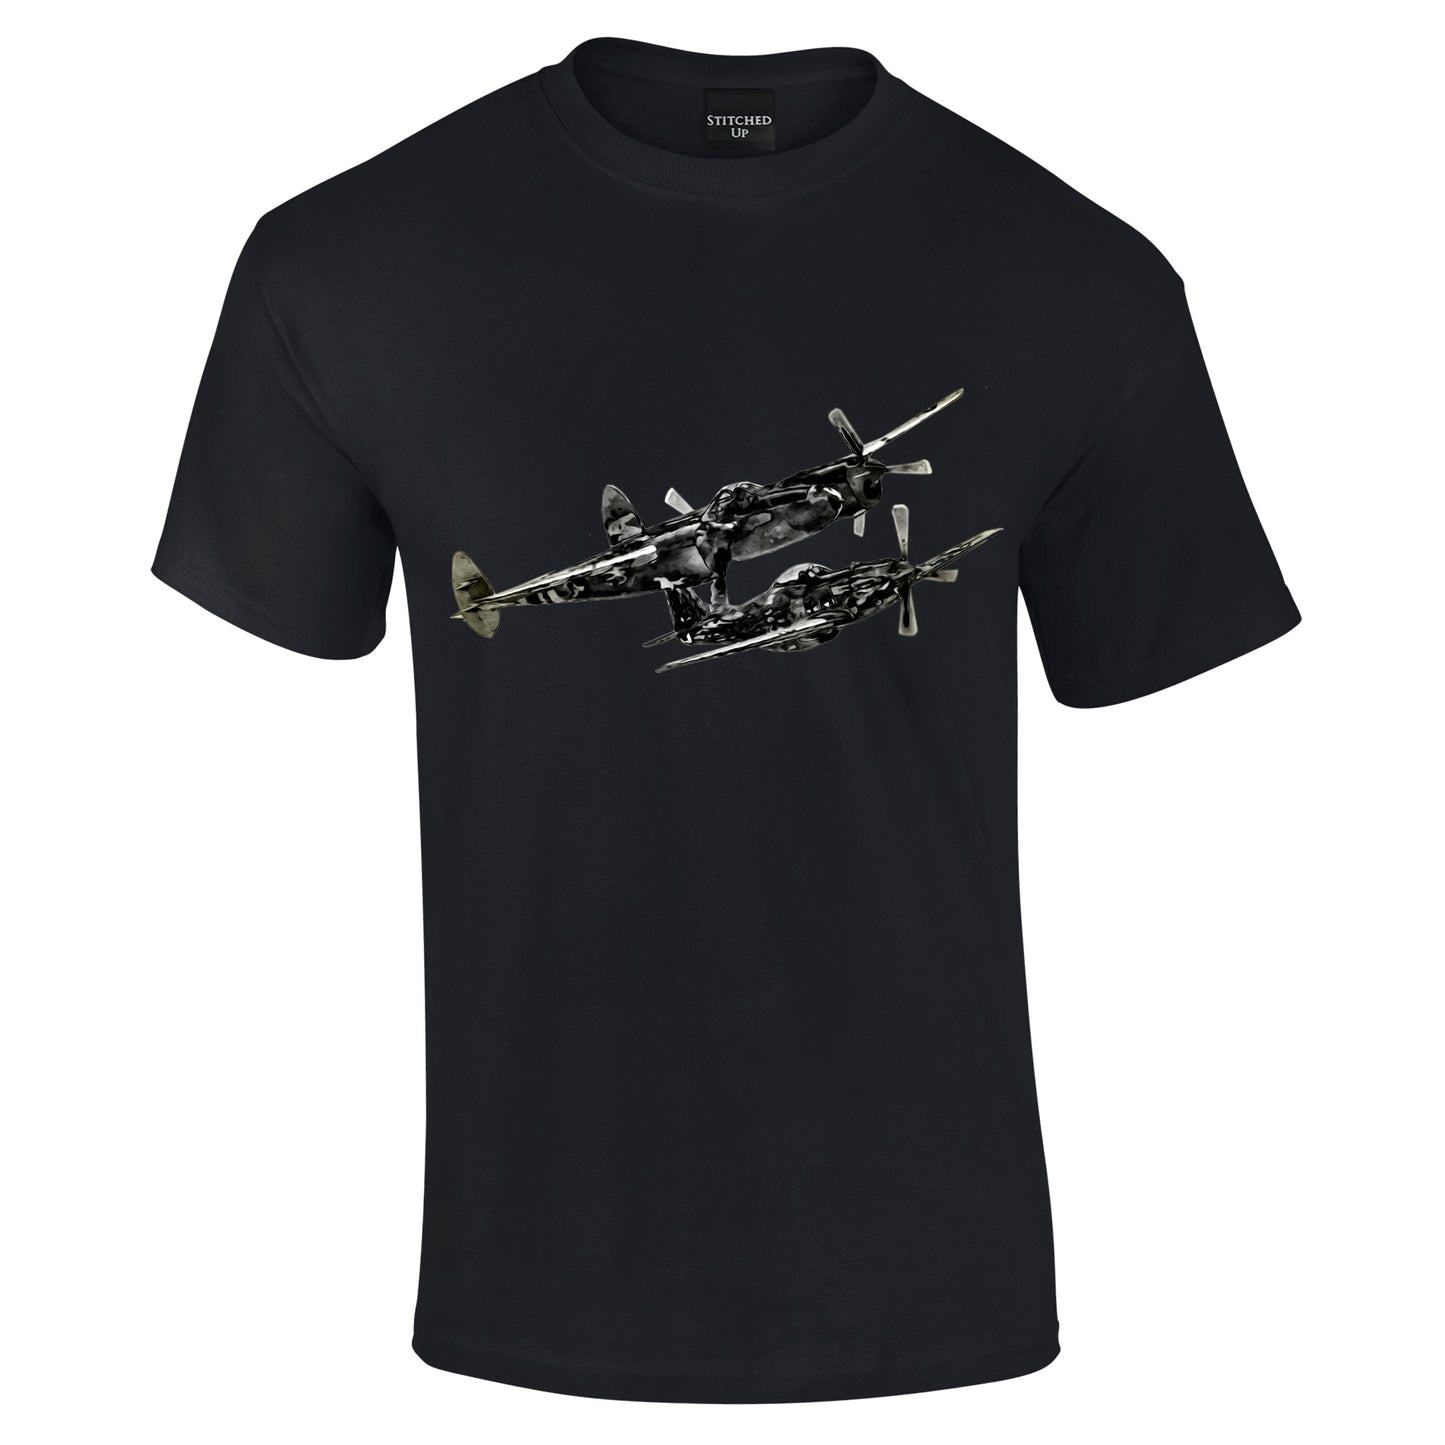 Mosquito and the Mustang Art T-Shirt